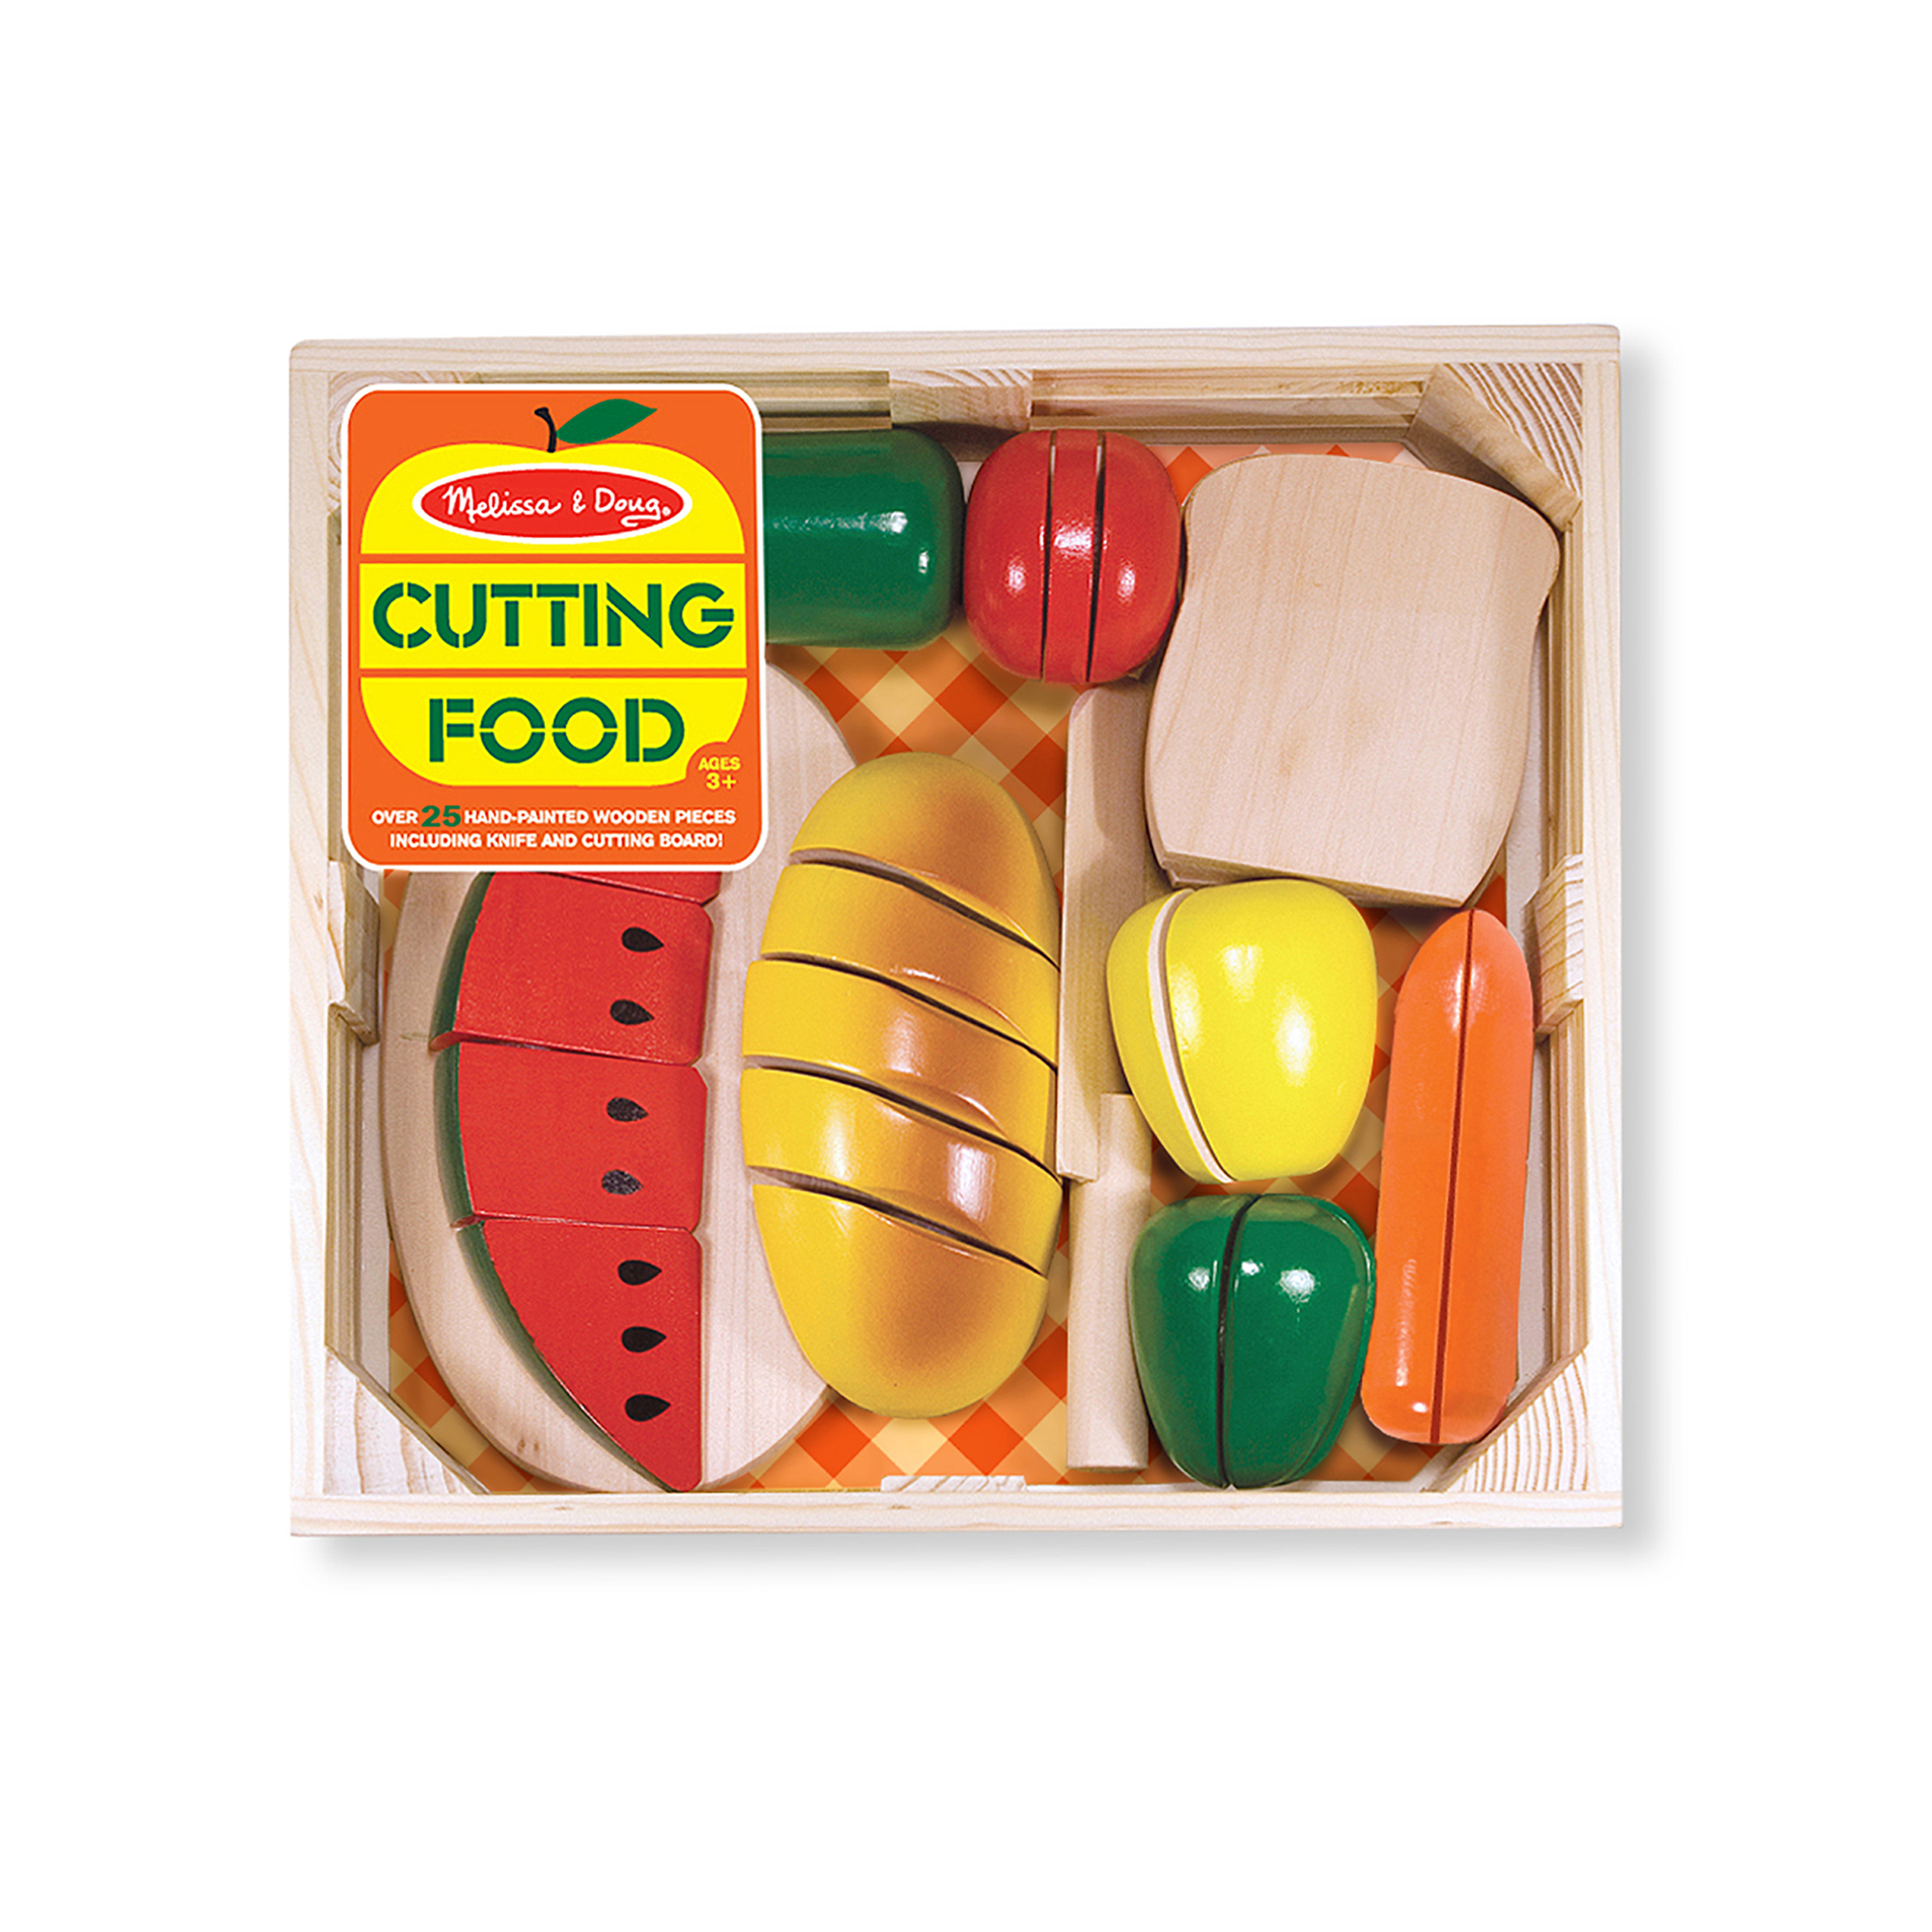 Cutting Food - Play Food Set With 25+ Hand-painted Wooden Pieces, Knife, And Cutting Board